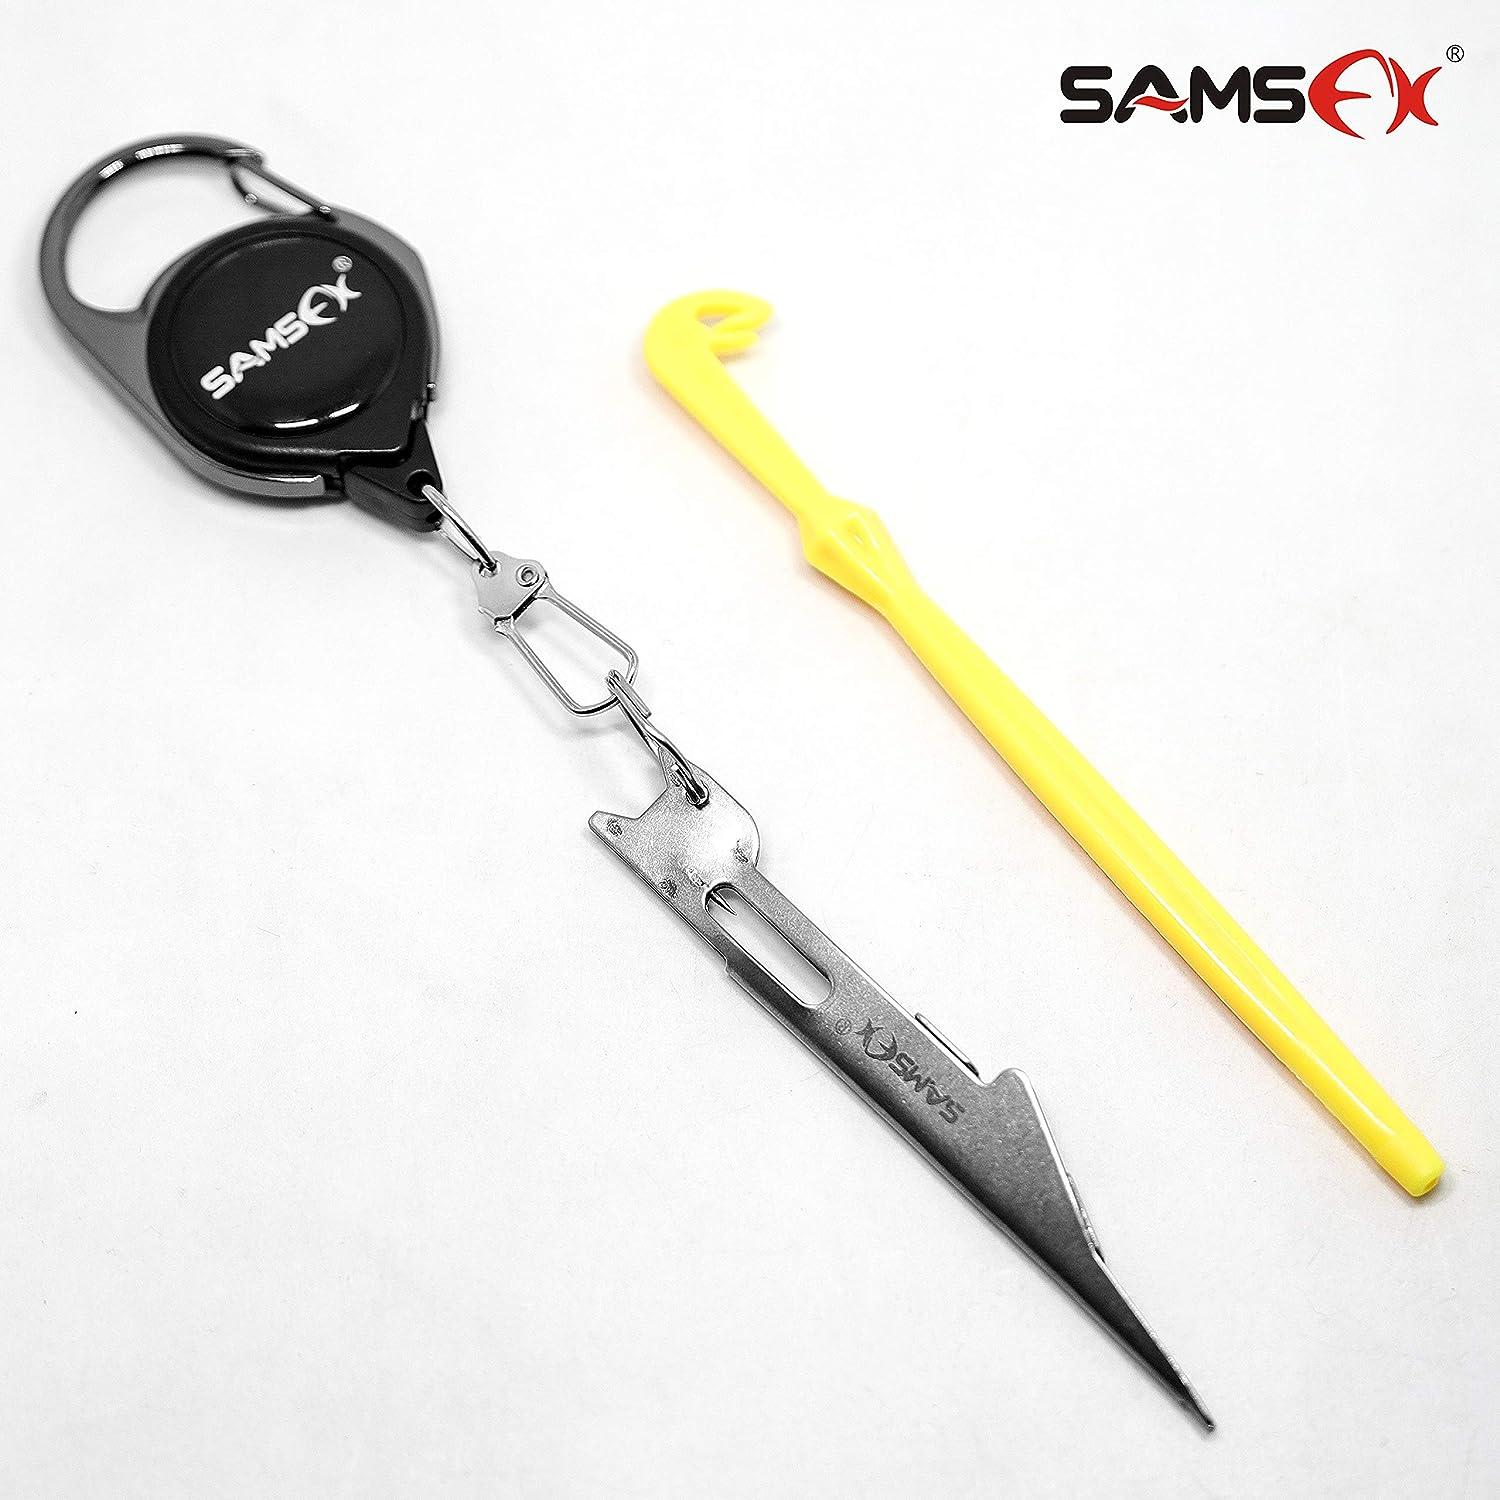 SAMSFX Fly Fishing Knot Tying Tool for Hooks, Lures and Lines, Quick Loop  Tyer, Zinger Retractors Combo 4 Silver Knot Tool with Retractor & Loop Tyer